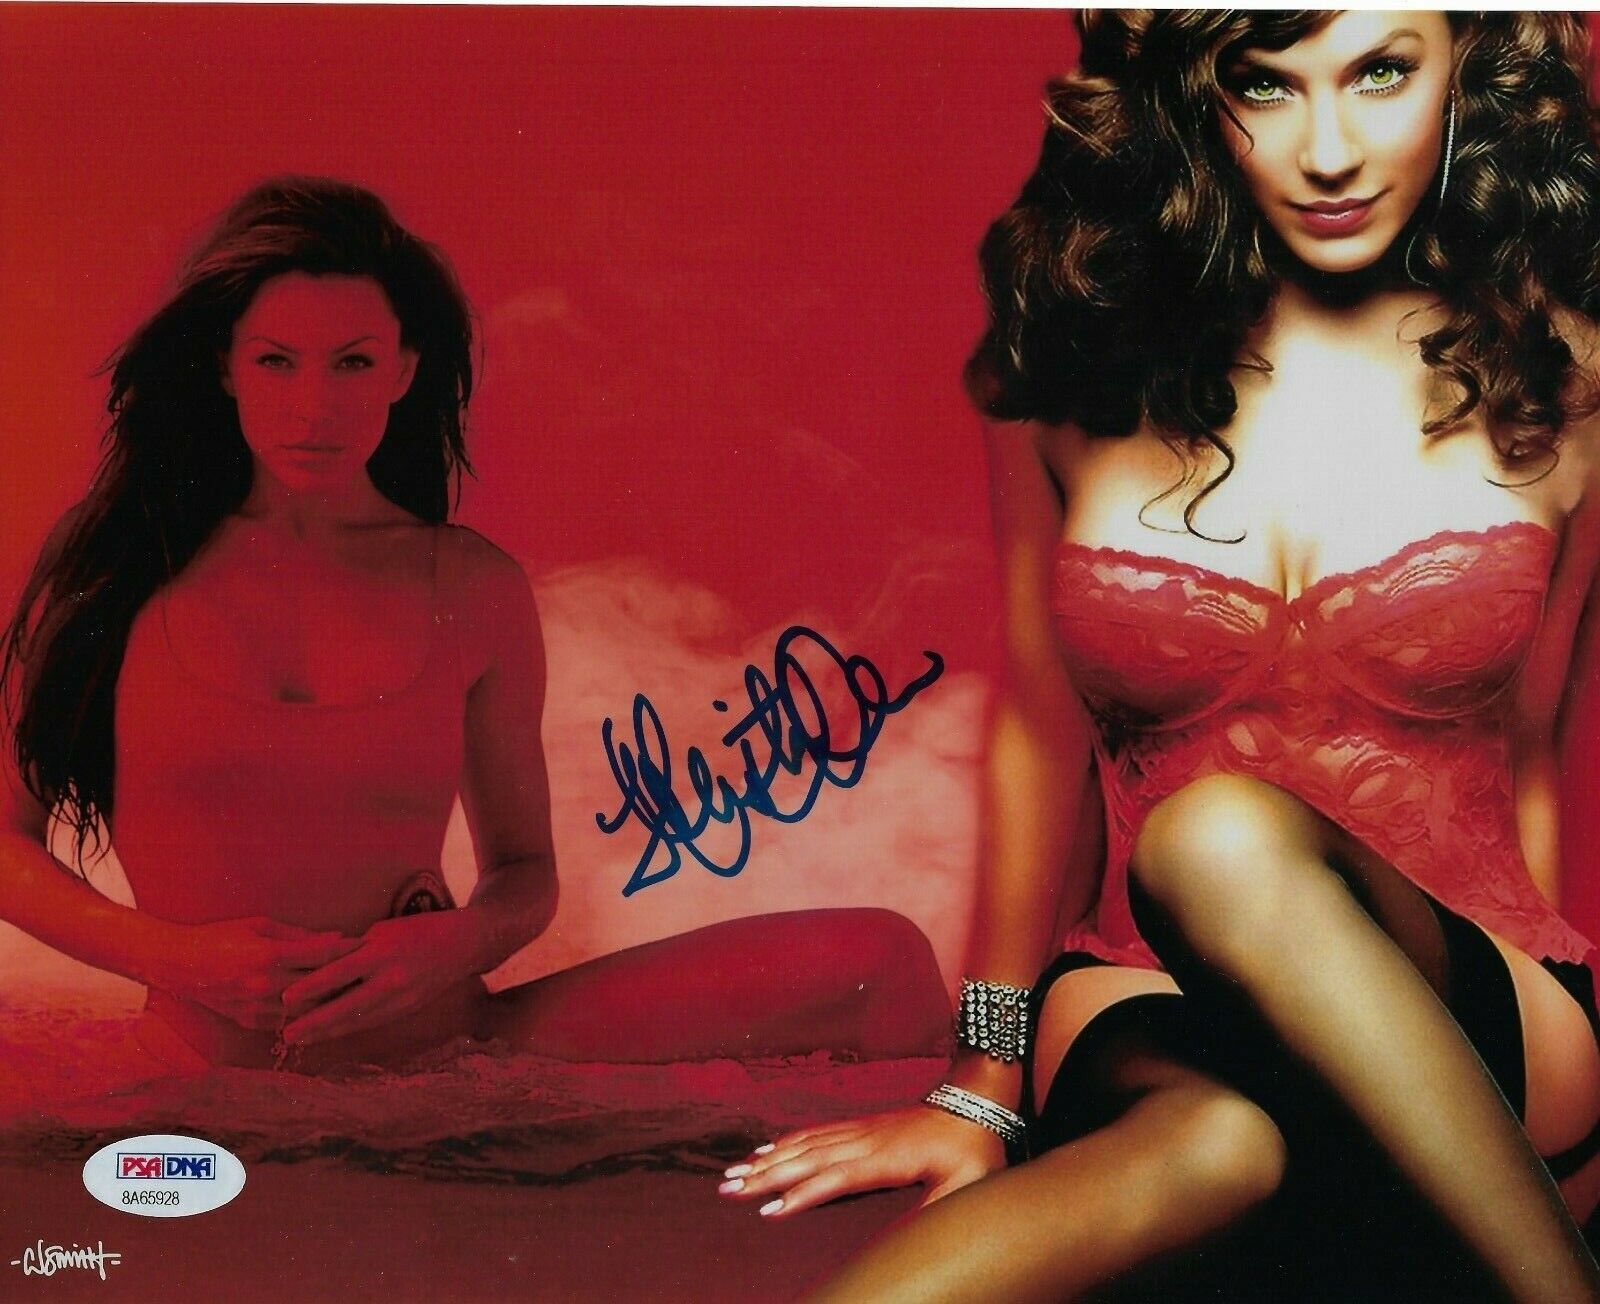 KRISTA ALLEN SIGNED AUTOGRAPHED 11X14 PHOTO VERY SEXY PSA/DNA BAYWATCH 